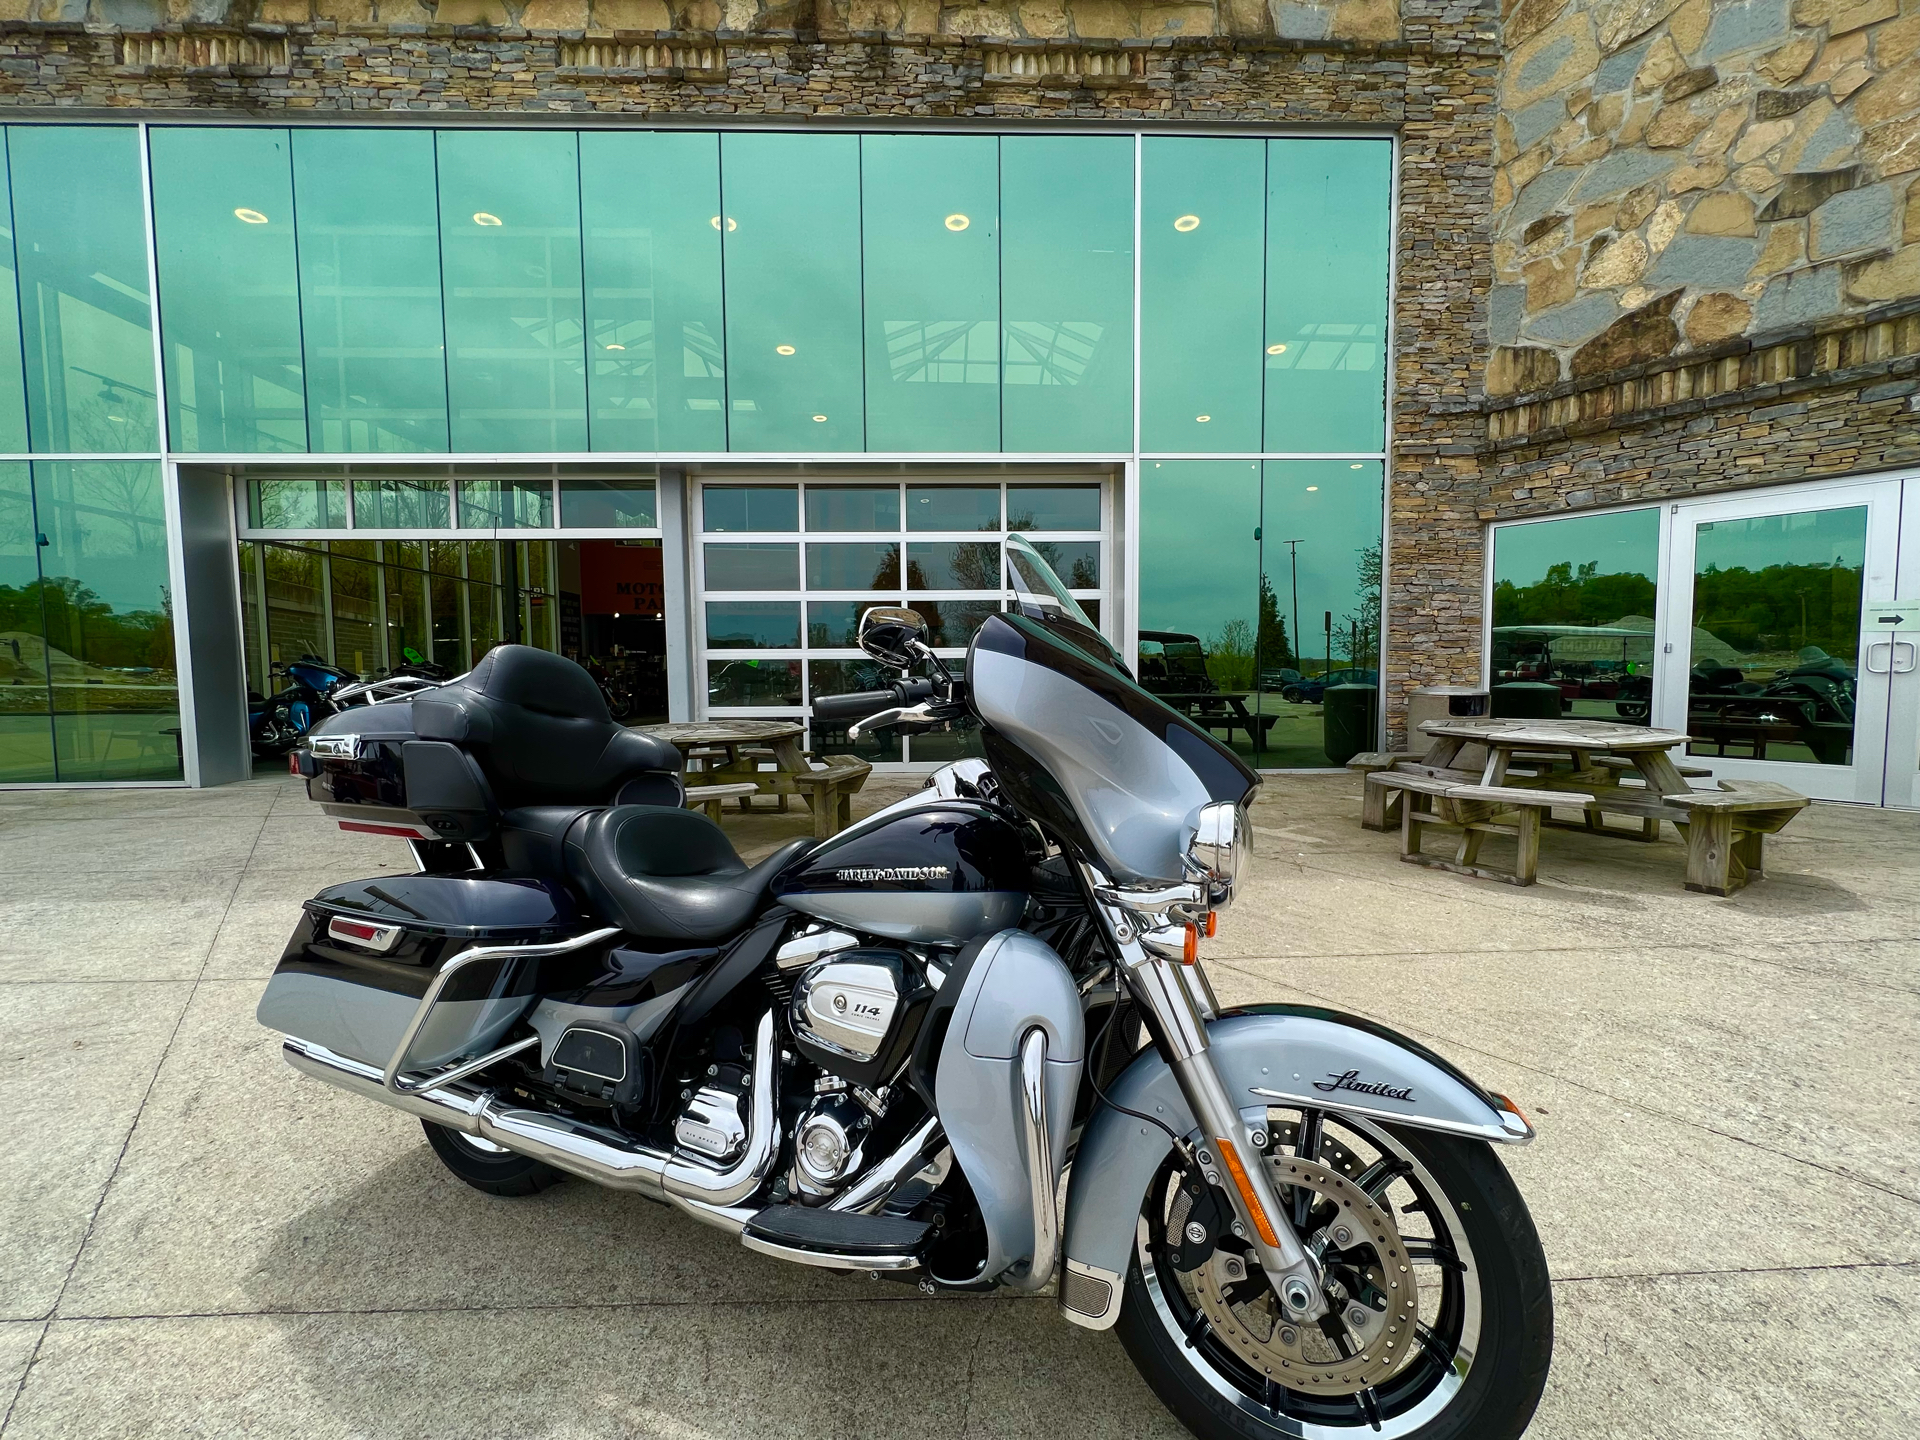 2019 Harley-Davidson FLHTK Ultra Limited in Columbia, Tennessee - Photo 5